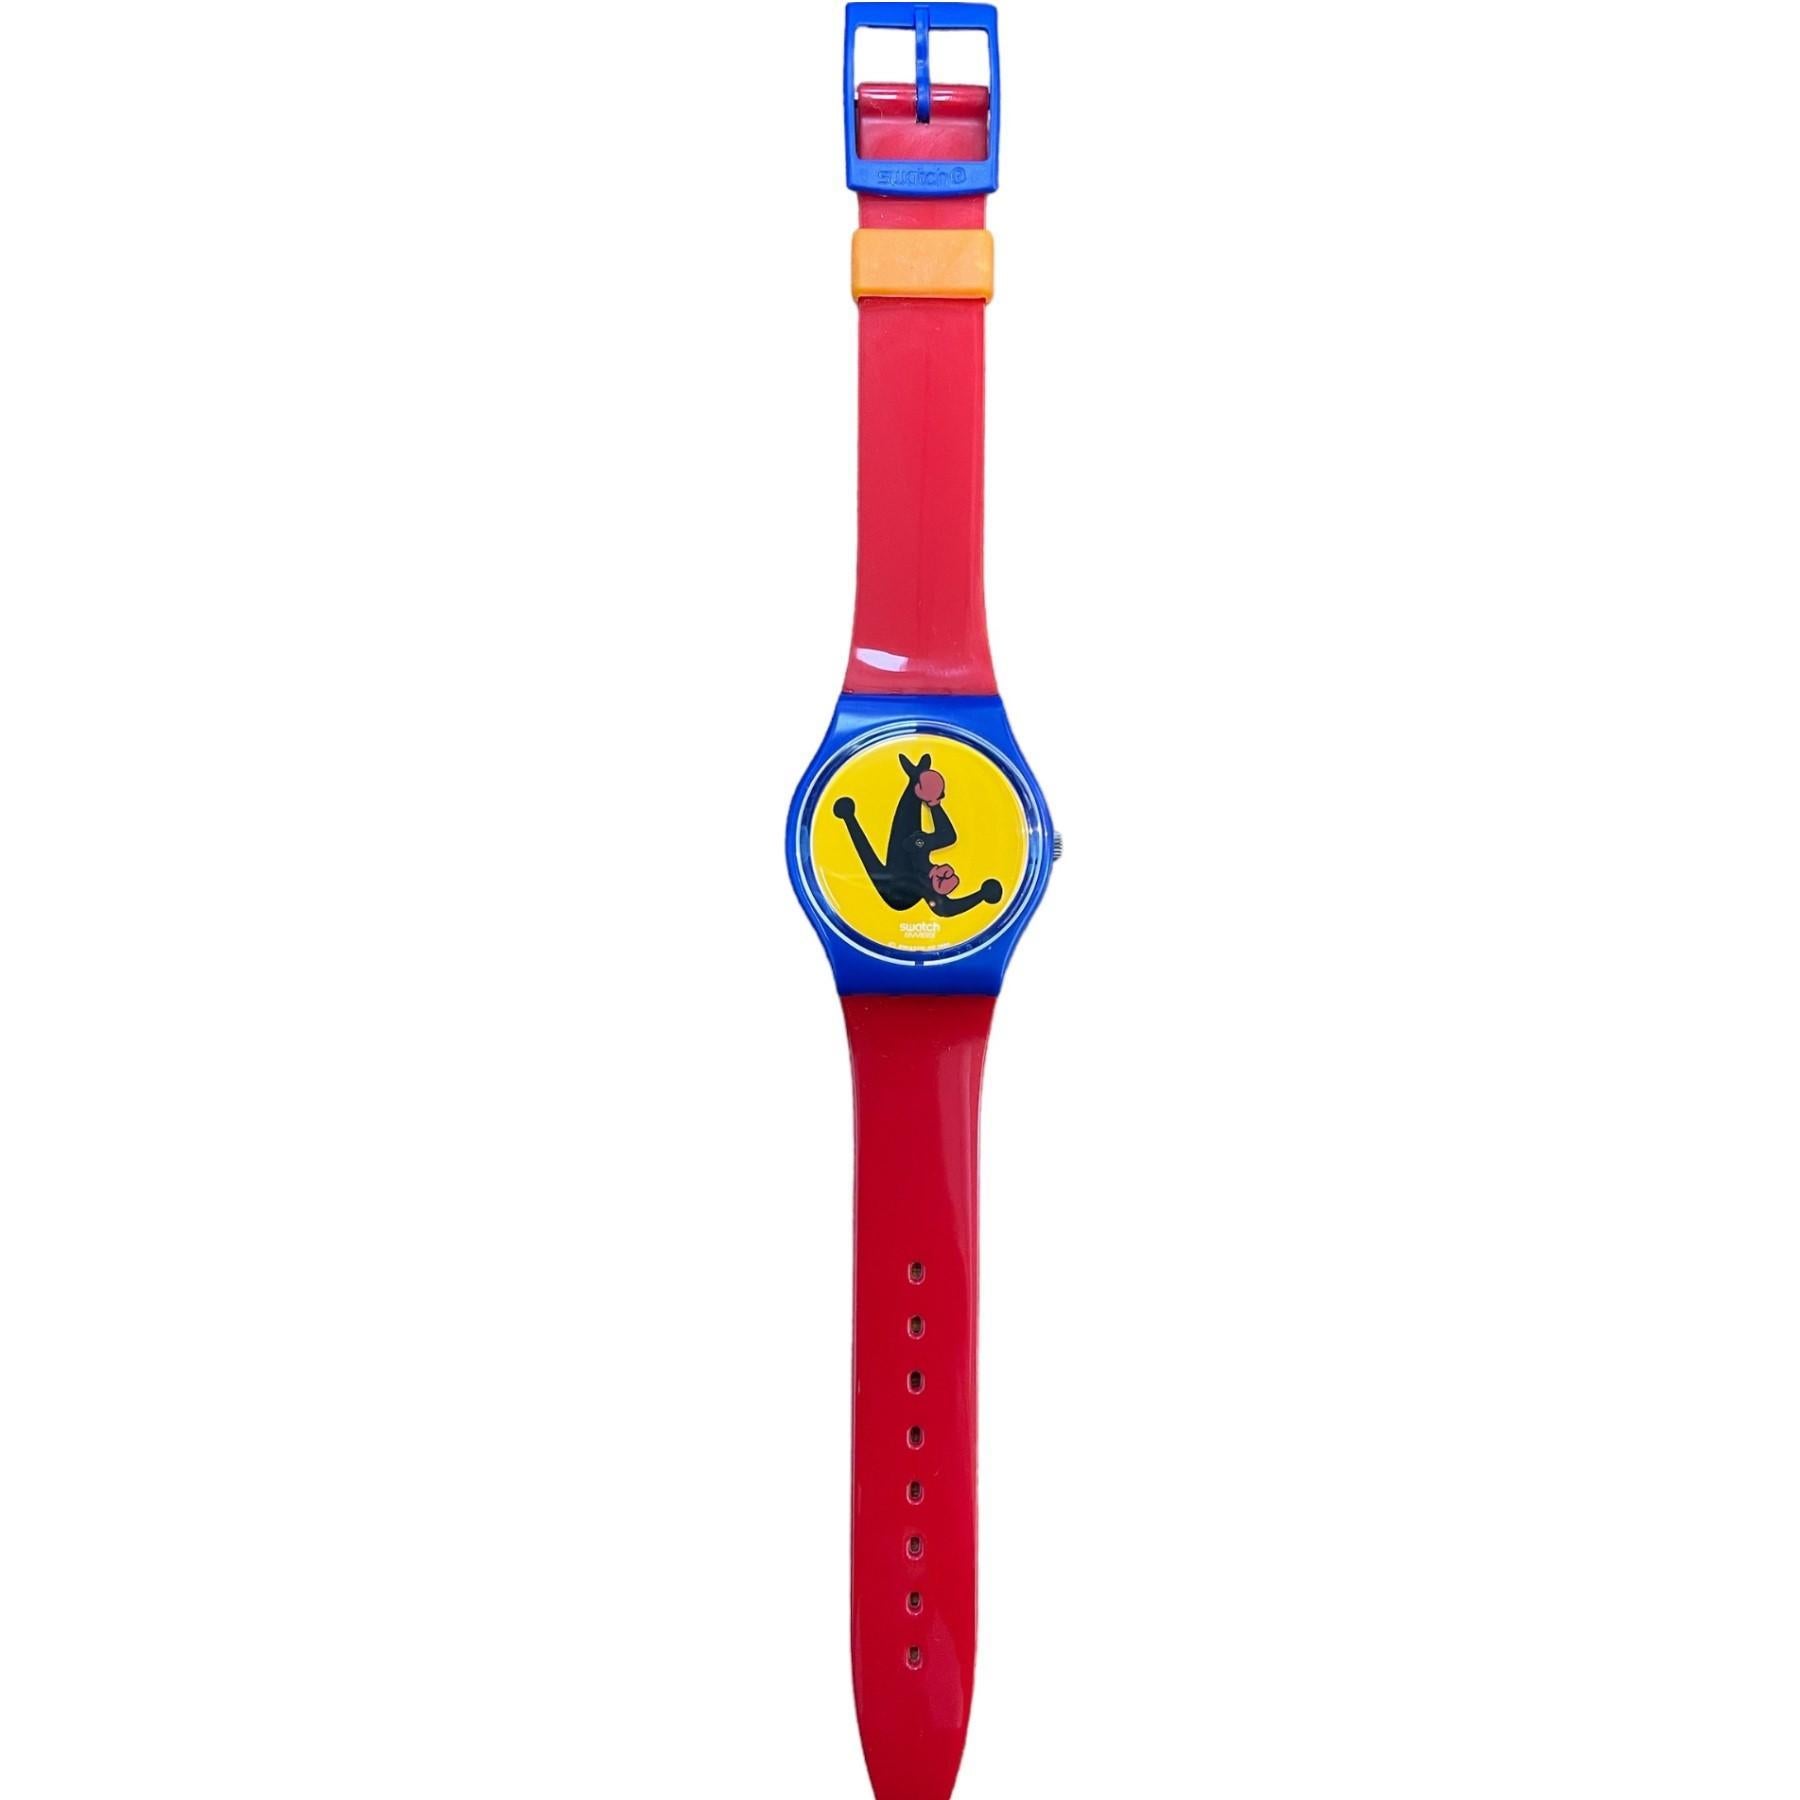 Immerse yourself in the artistic world of Eduardo Arroyo with this unique vintage Swatch Gent BOXING GN163 watch. Designed by the renowned Spanish painter and graphic designer, this timepiece is a true collector's gem, featuring the iconic boxing